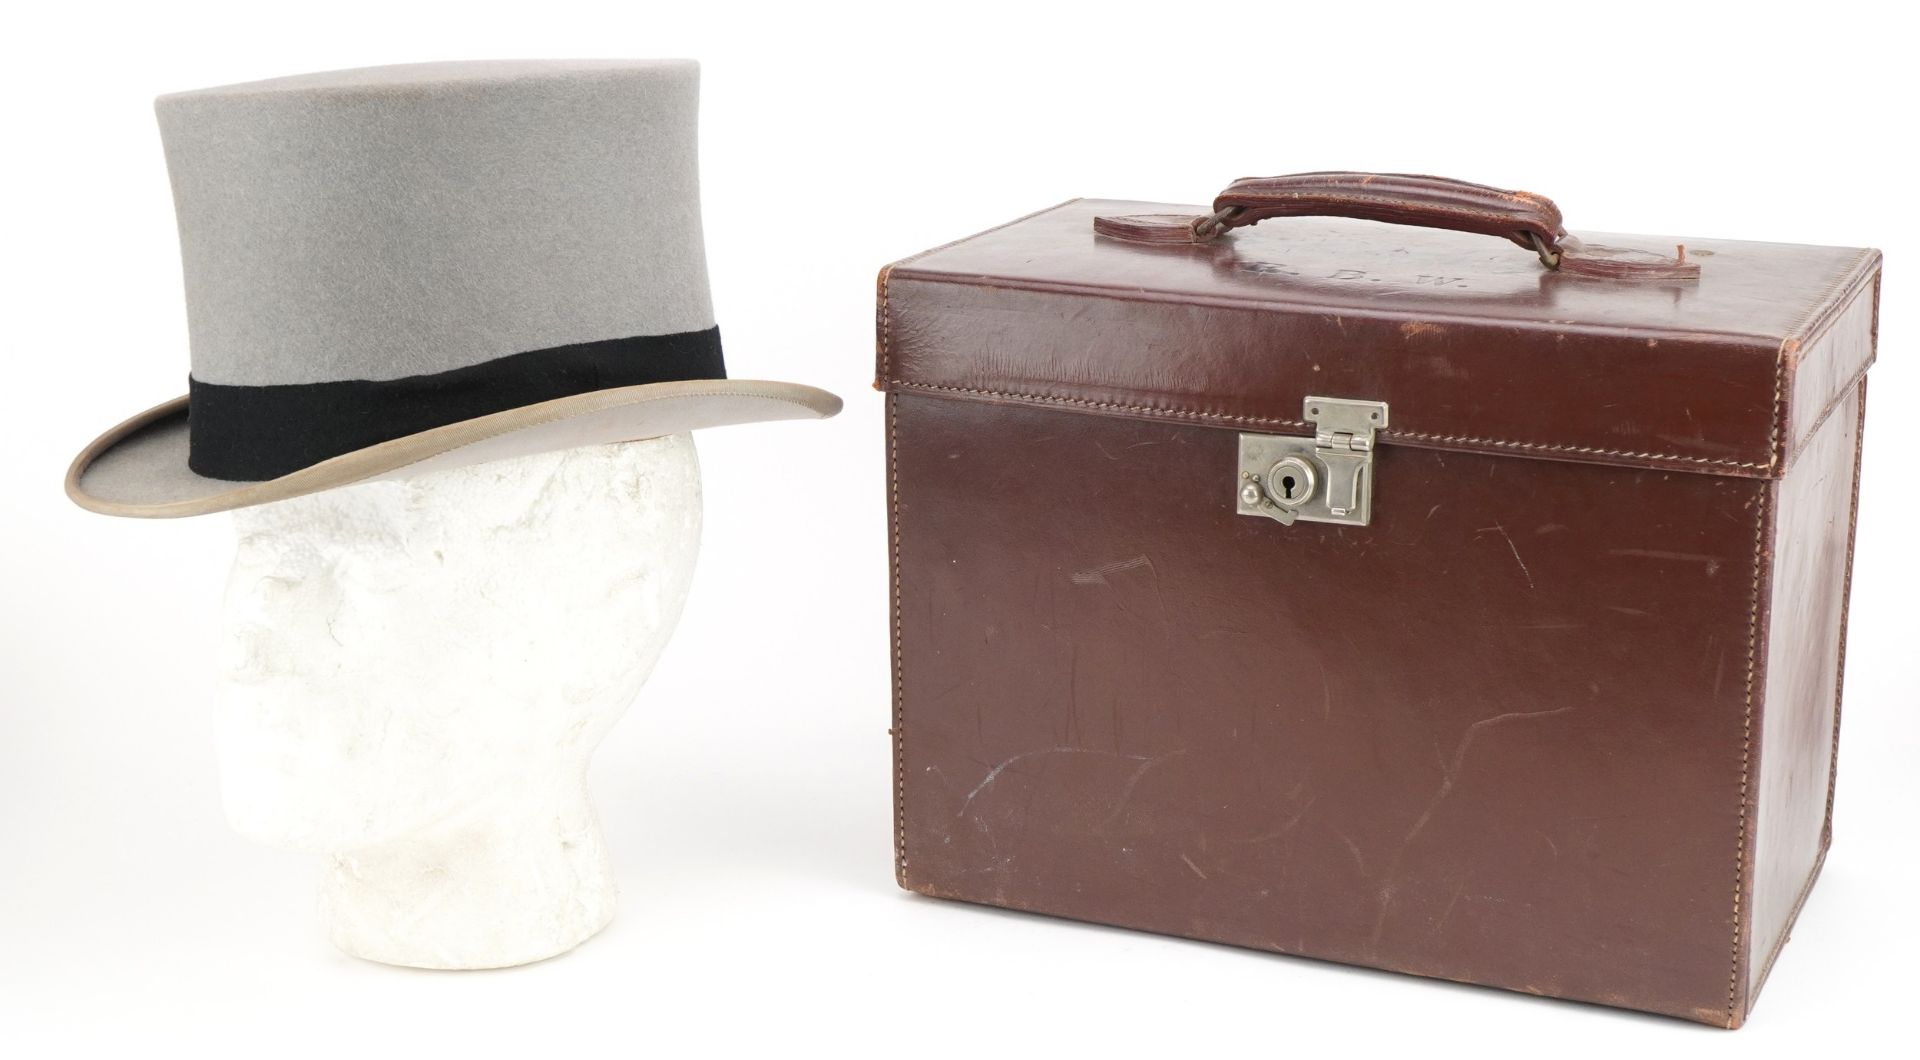 Scott & Co top hat housed in a brown leatherette travel box, the top hat interior size 21cm x 17cm :